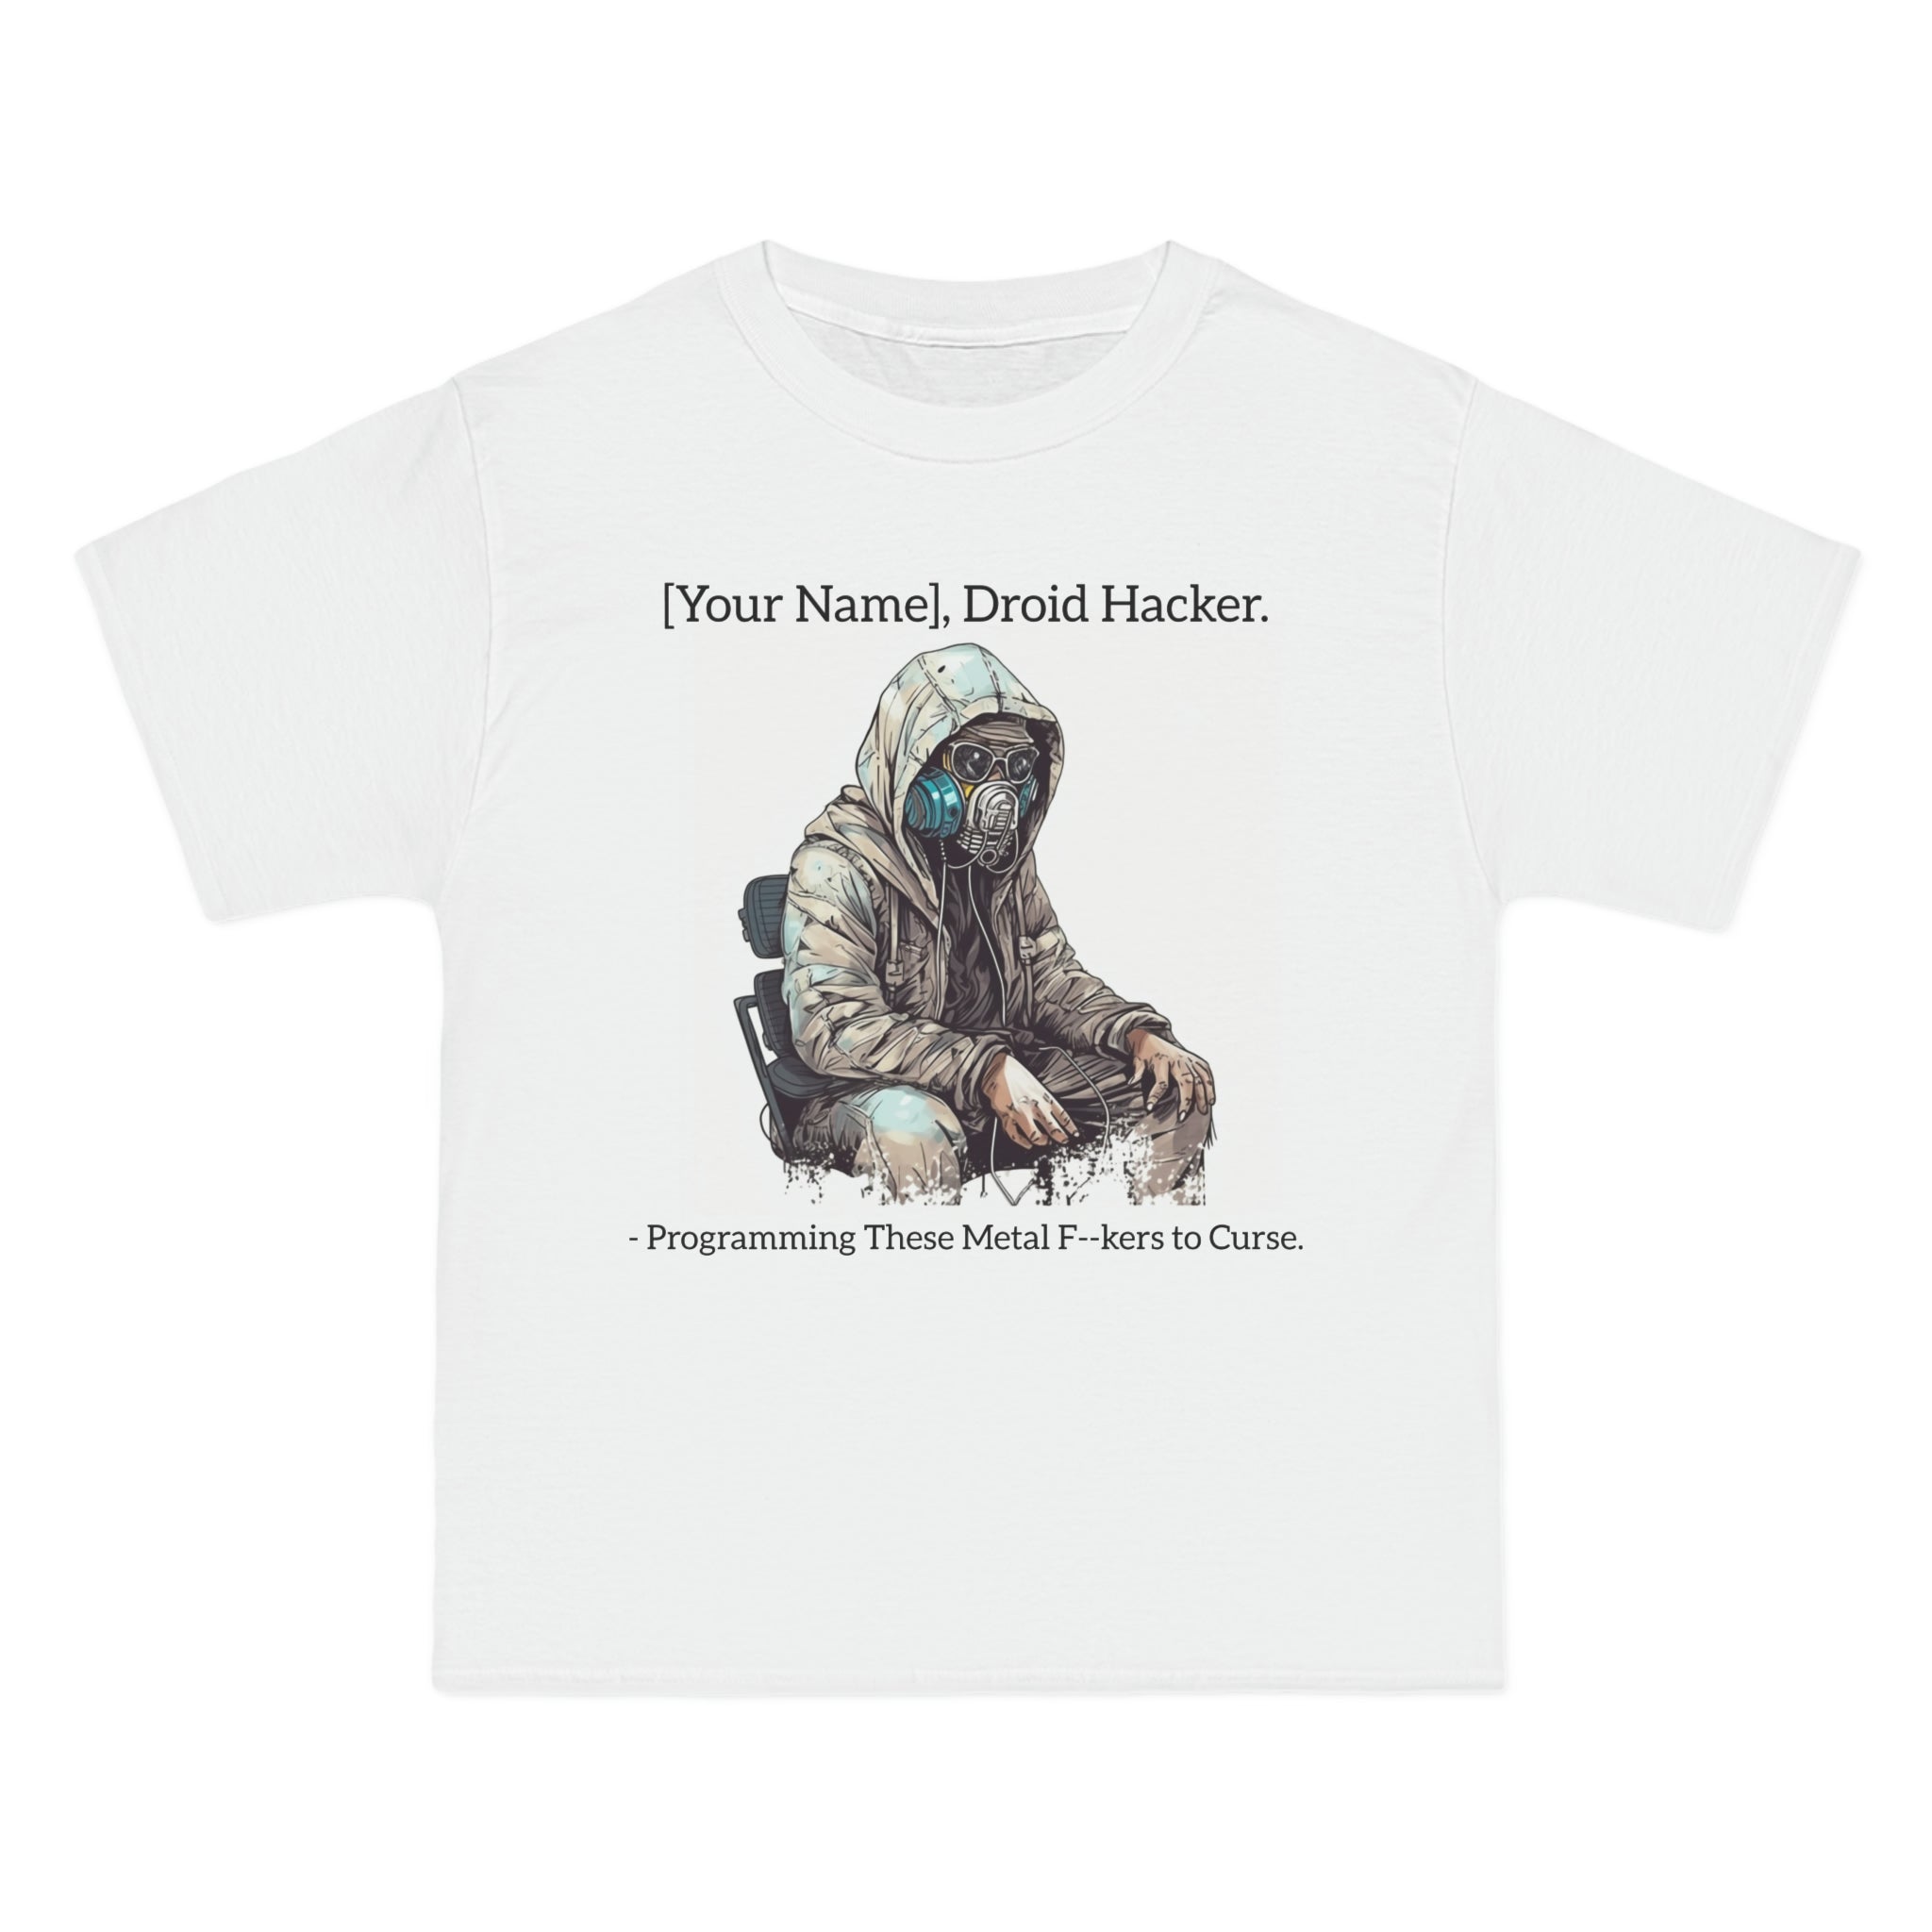 (Limited Supply) [Your Name], Droid Hacker - Programming These Metal Fuckers to Curse" Beefy-T® Short-Sleeve T-Shirt: A Must-Have for Trilogy and Sequel Fans